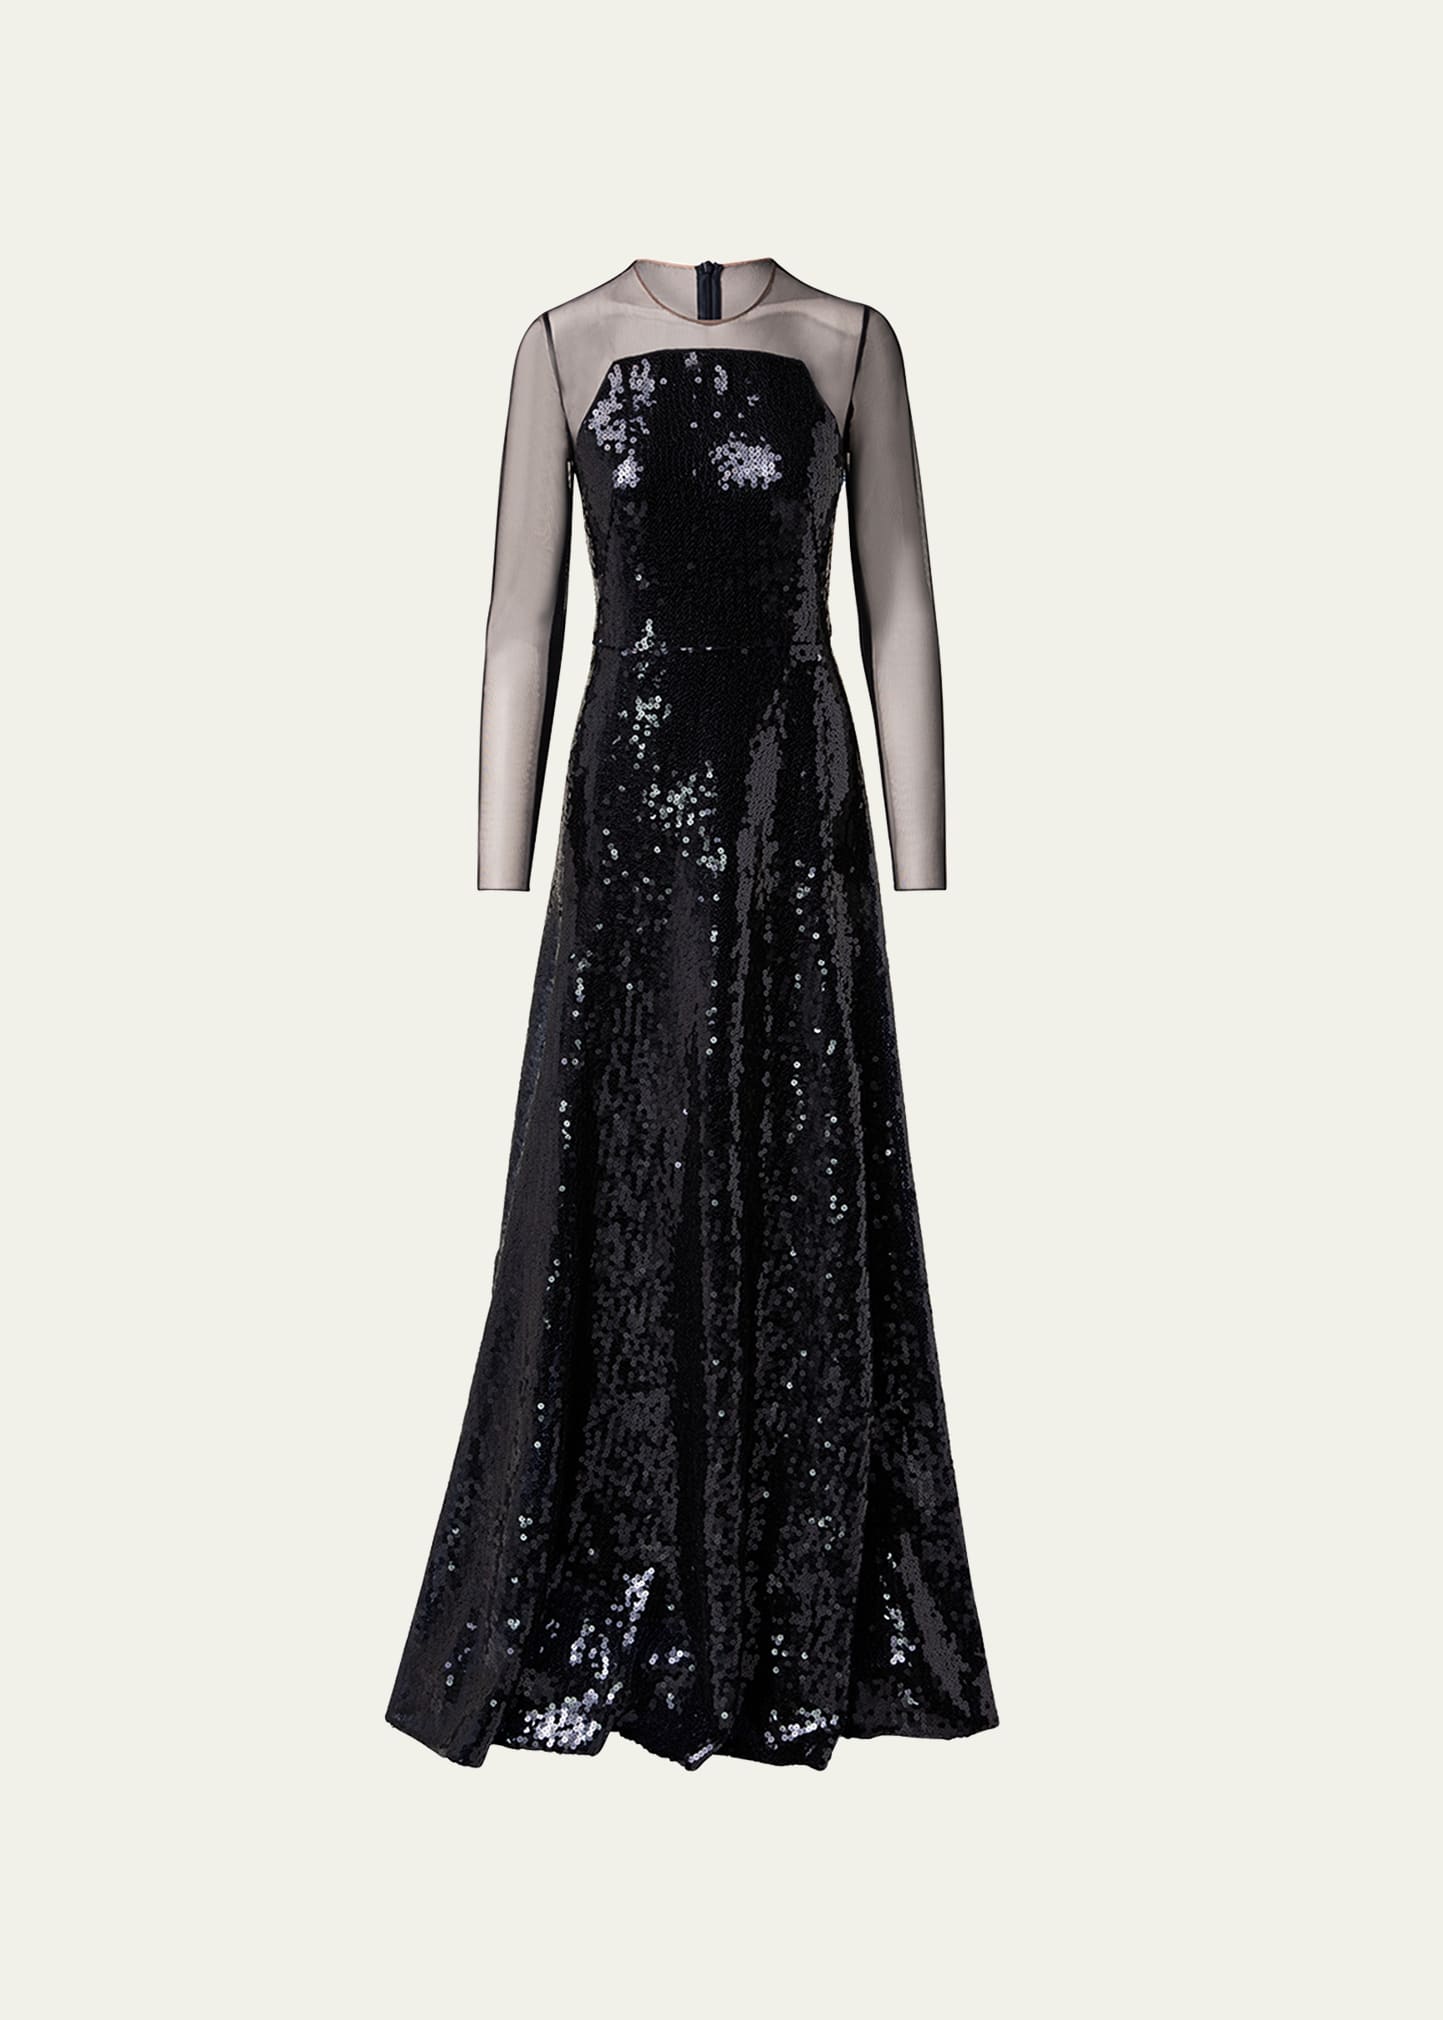 AKRIS SEQUIN LONG-SLEEVE ILLUSION GOWN